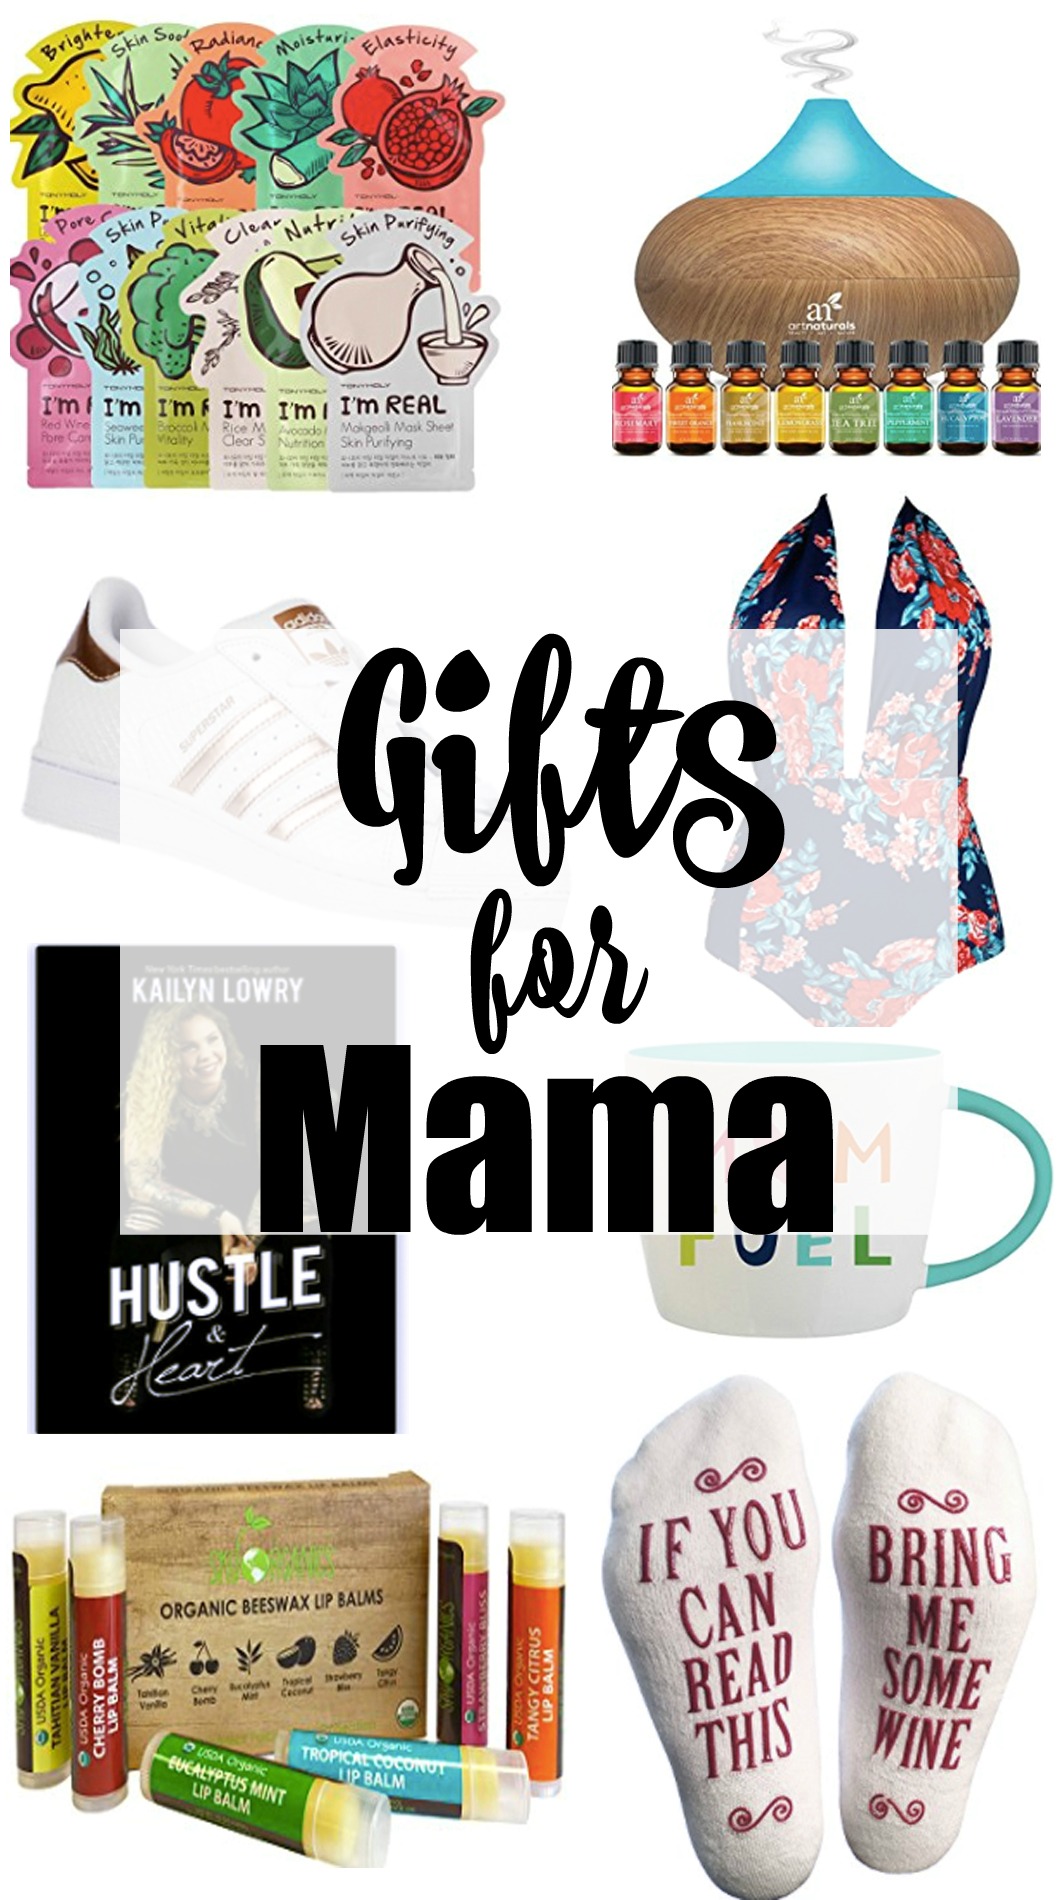 Treat Yourself: 8 Unique Gifts For Mom by Jessica from Happily Hughes